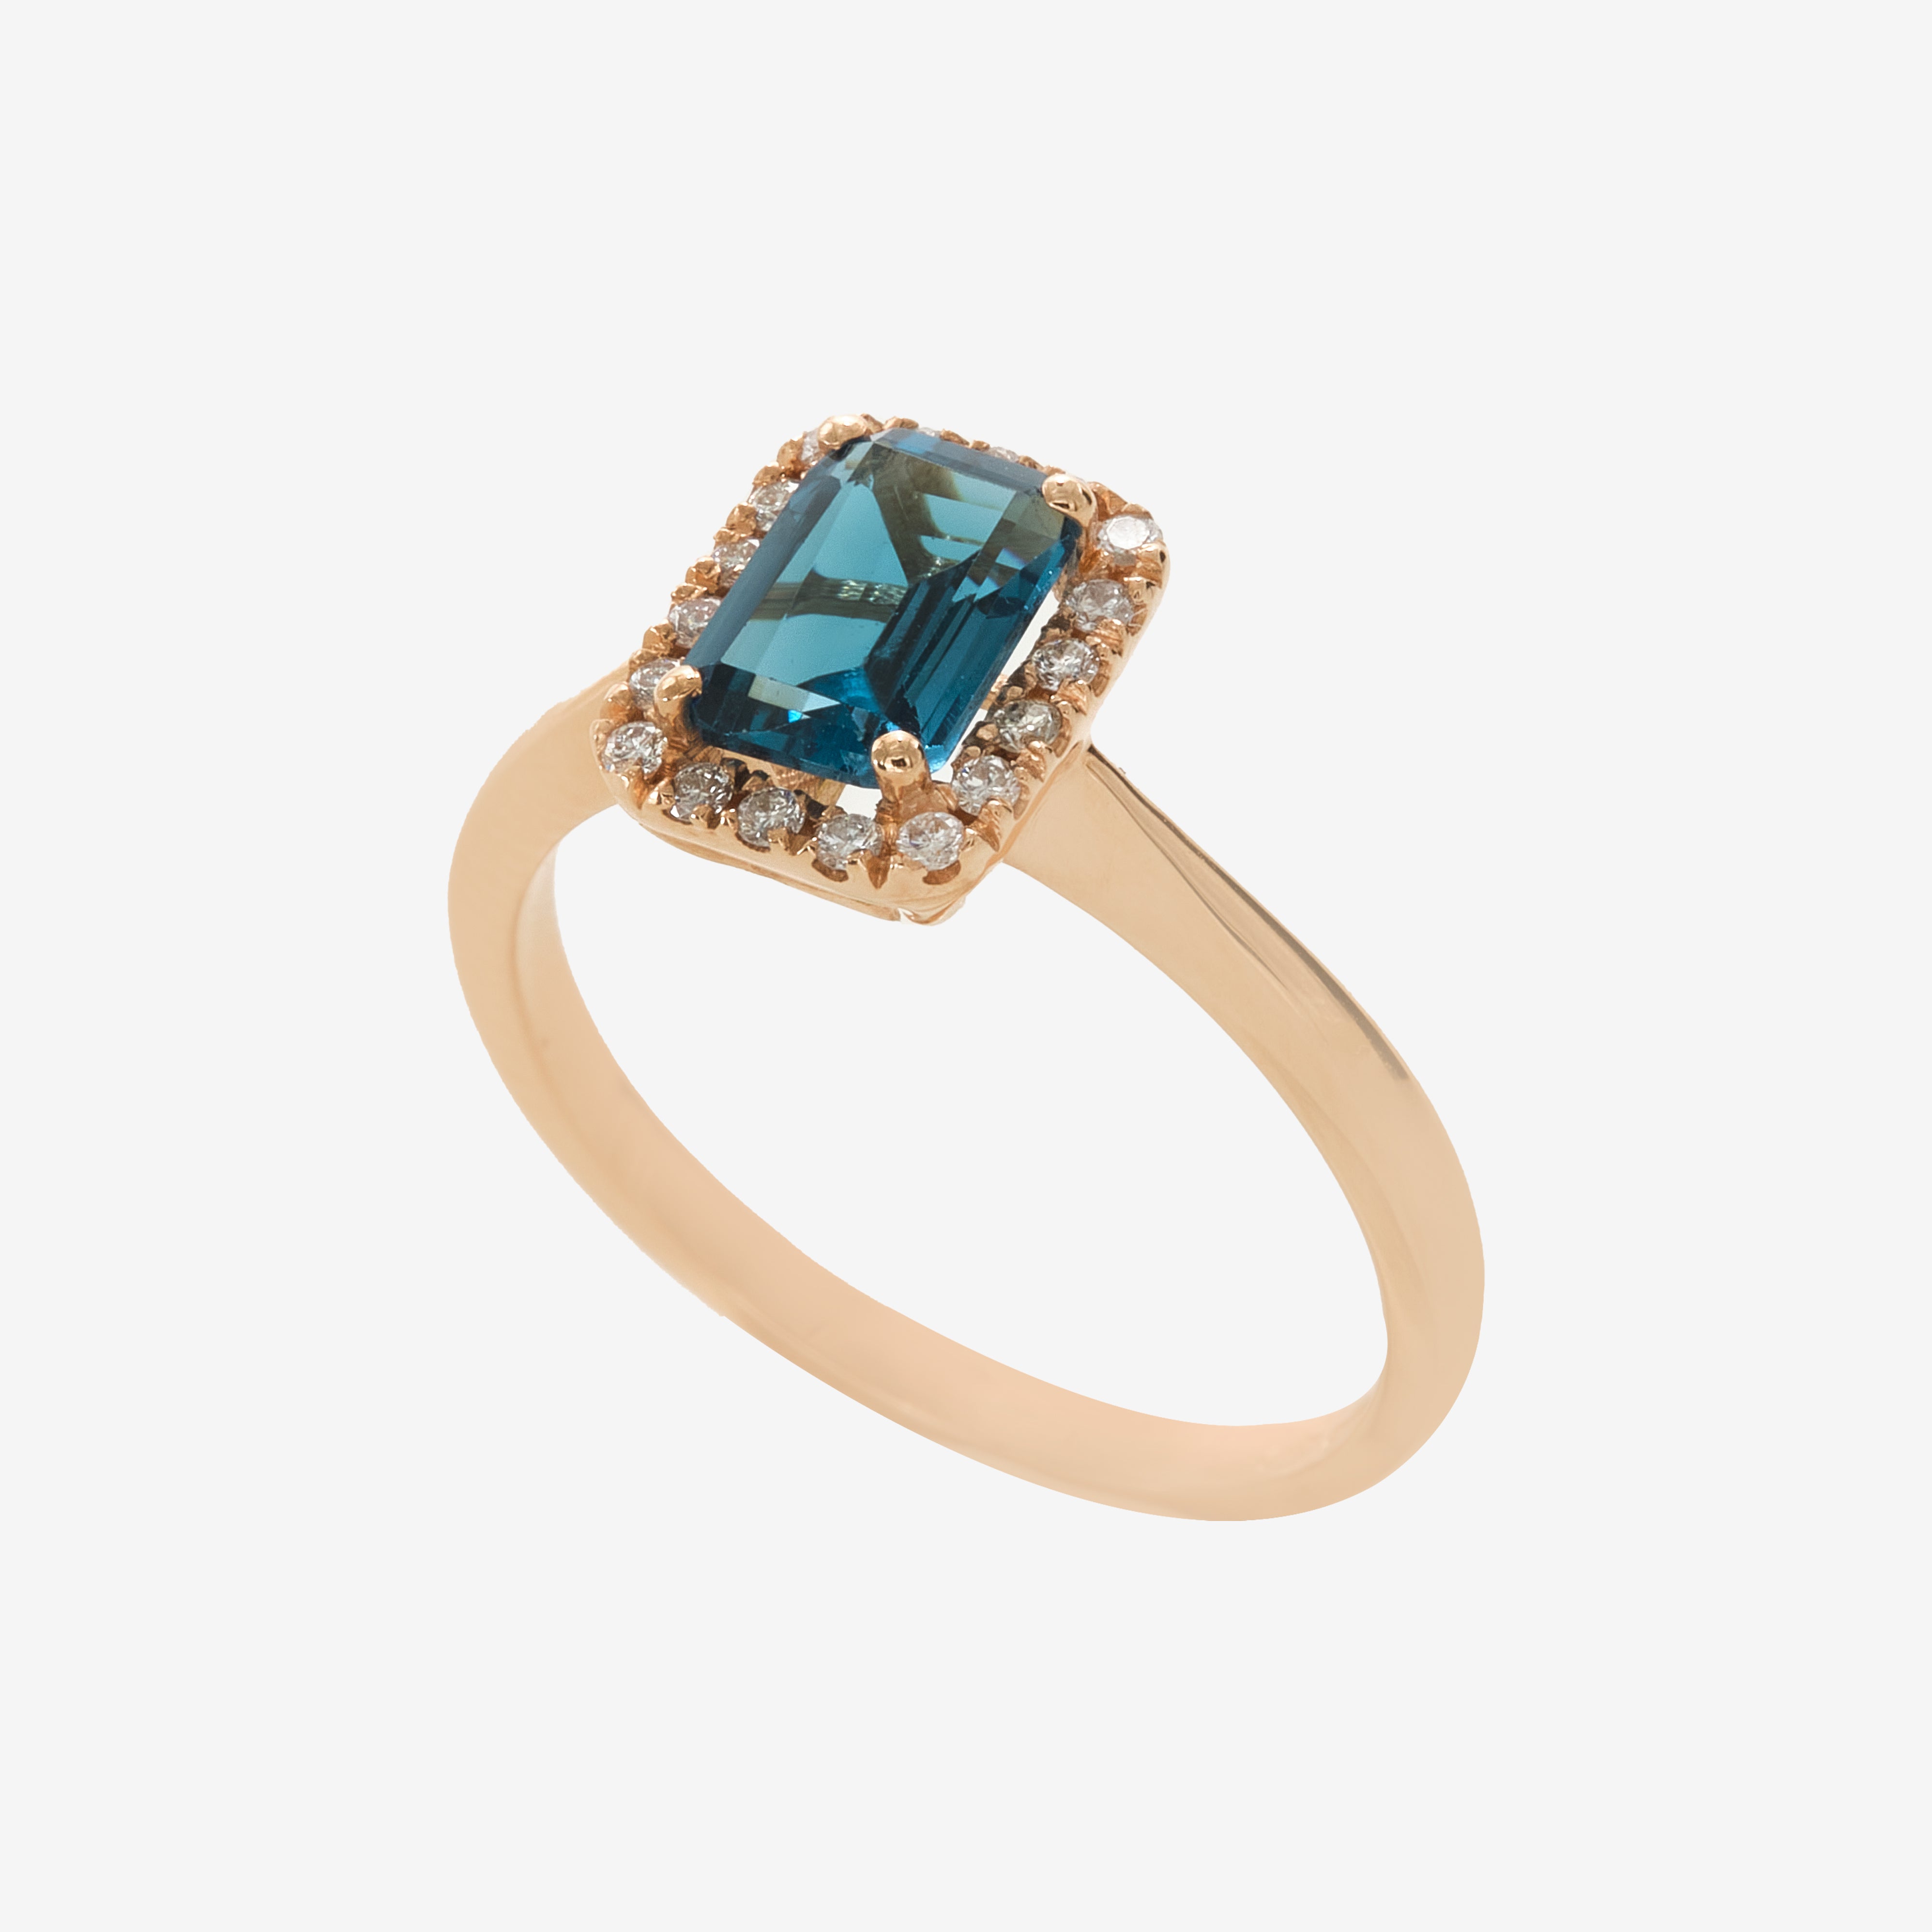 Blue ring with London topaz and diamonds